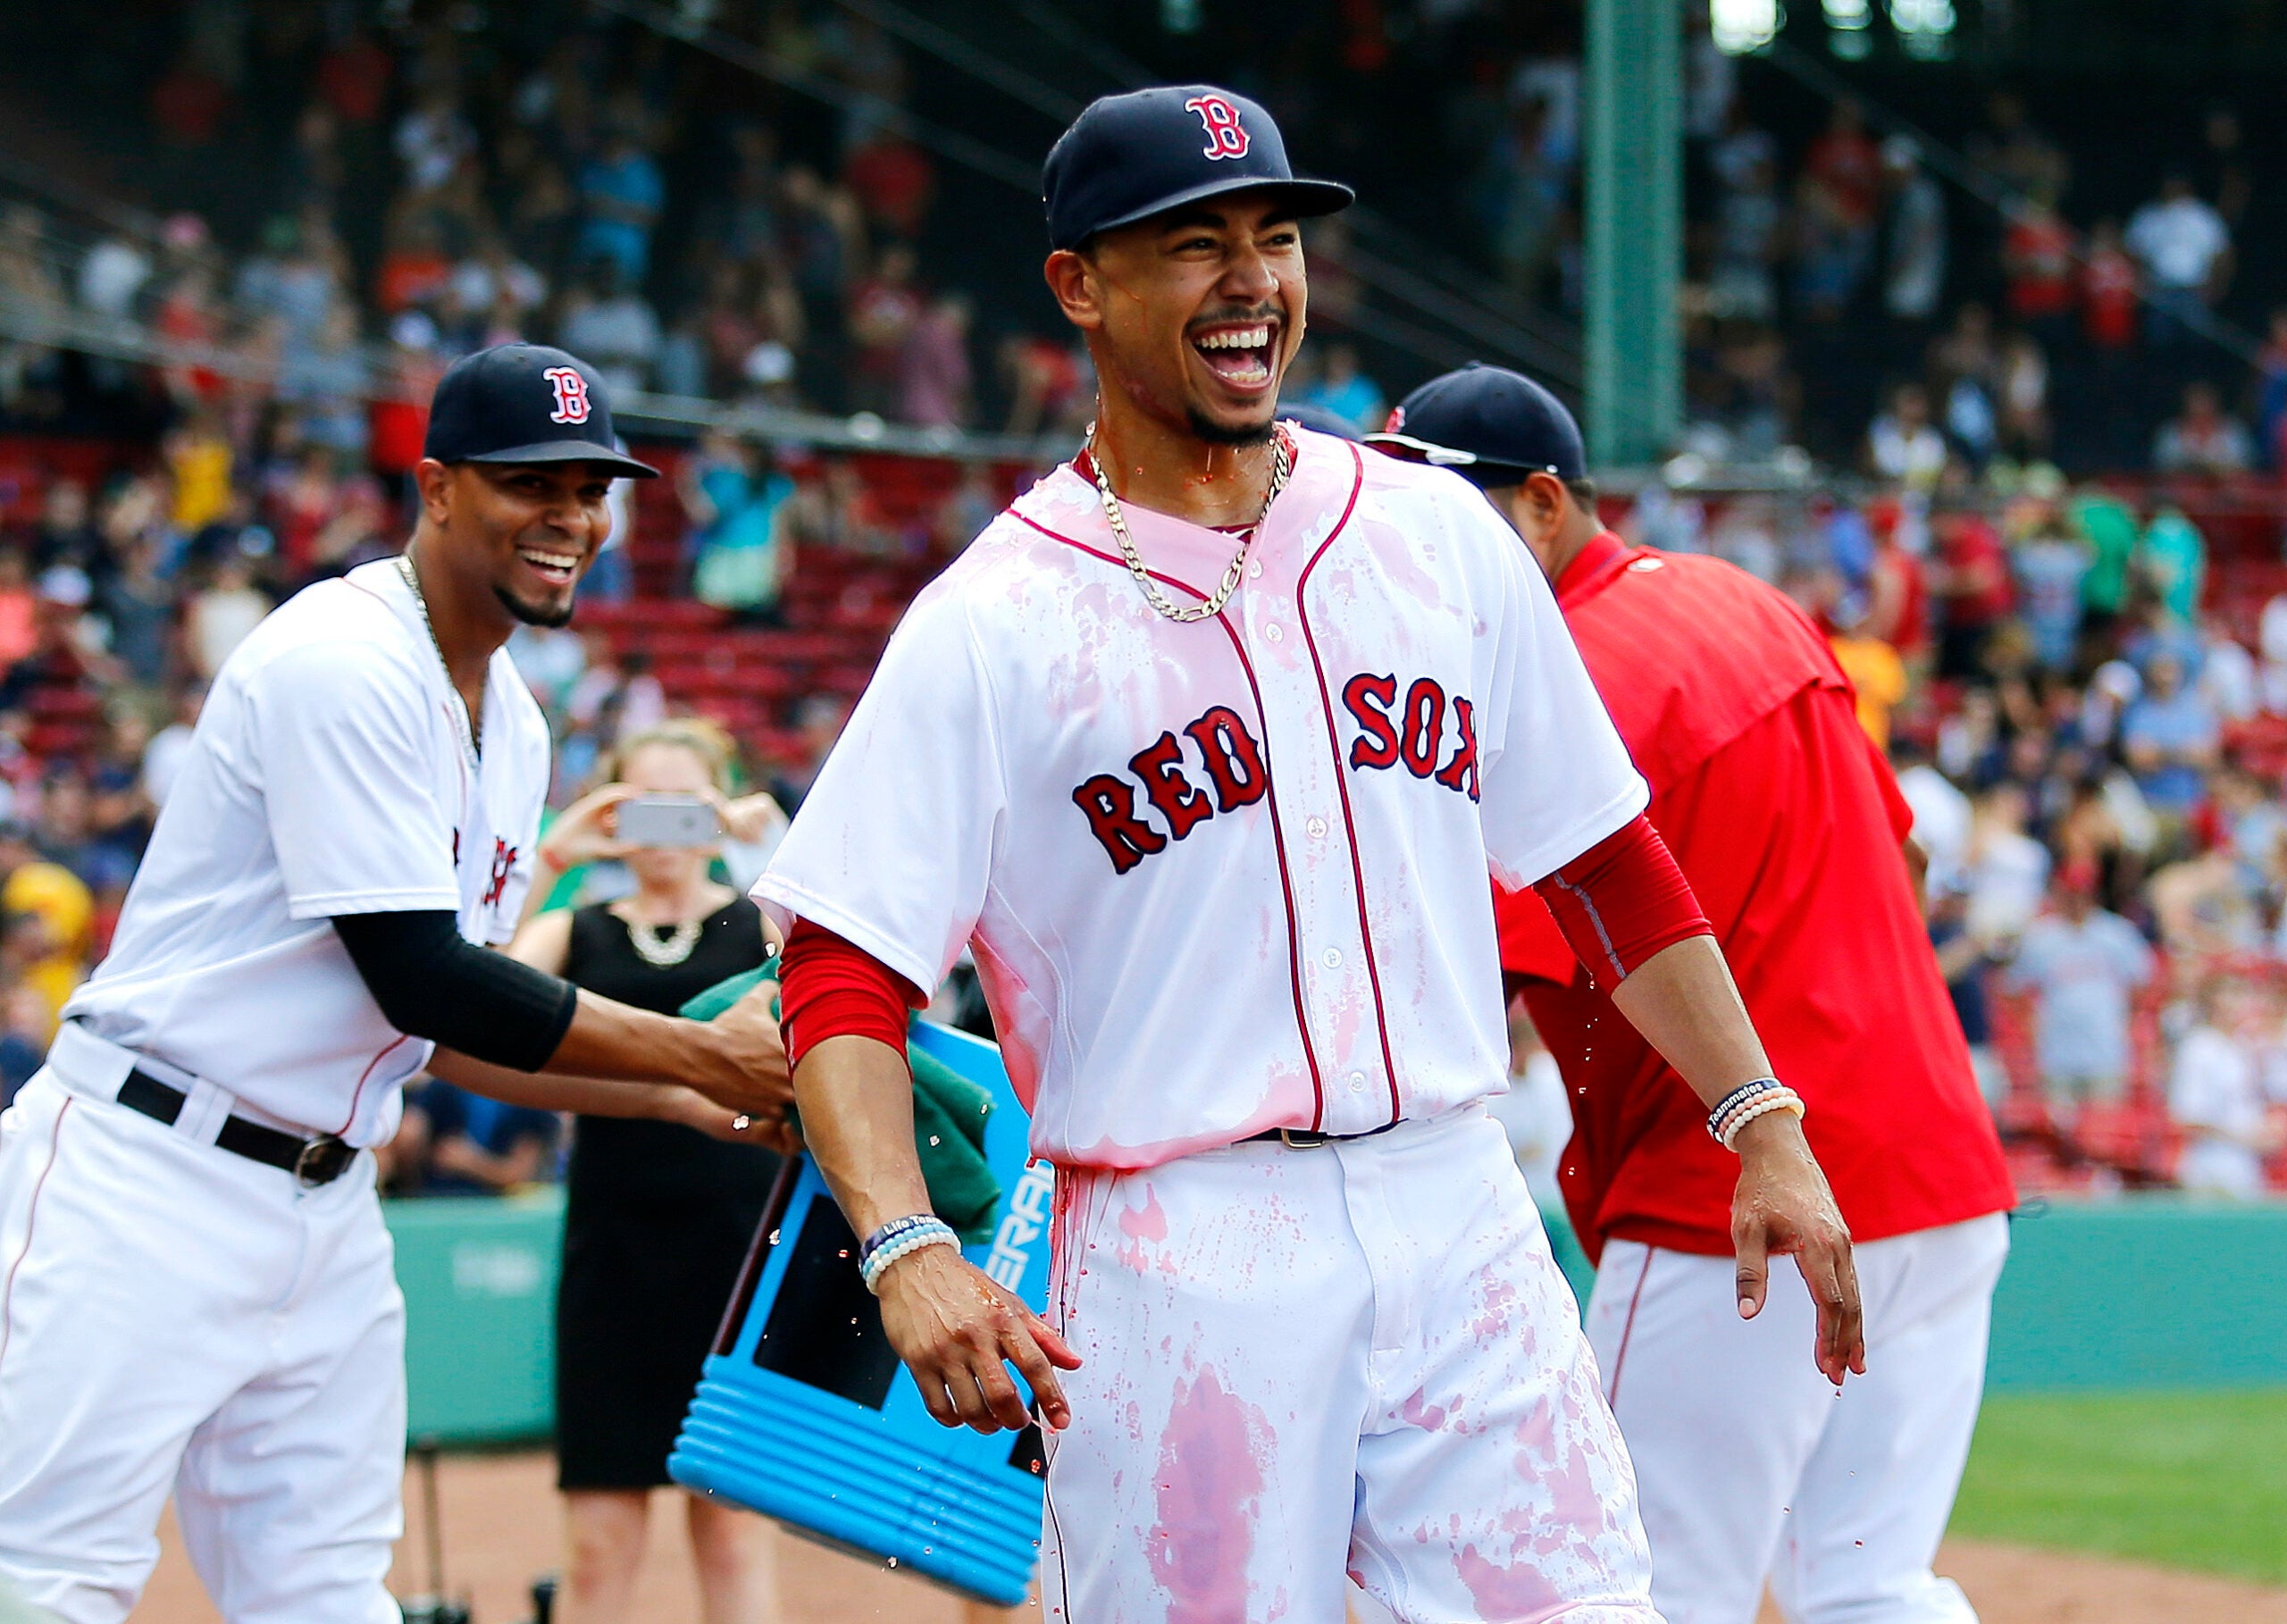 From Little League to Boston, Mookie Betts' mom has never stopped